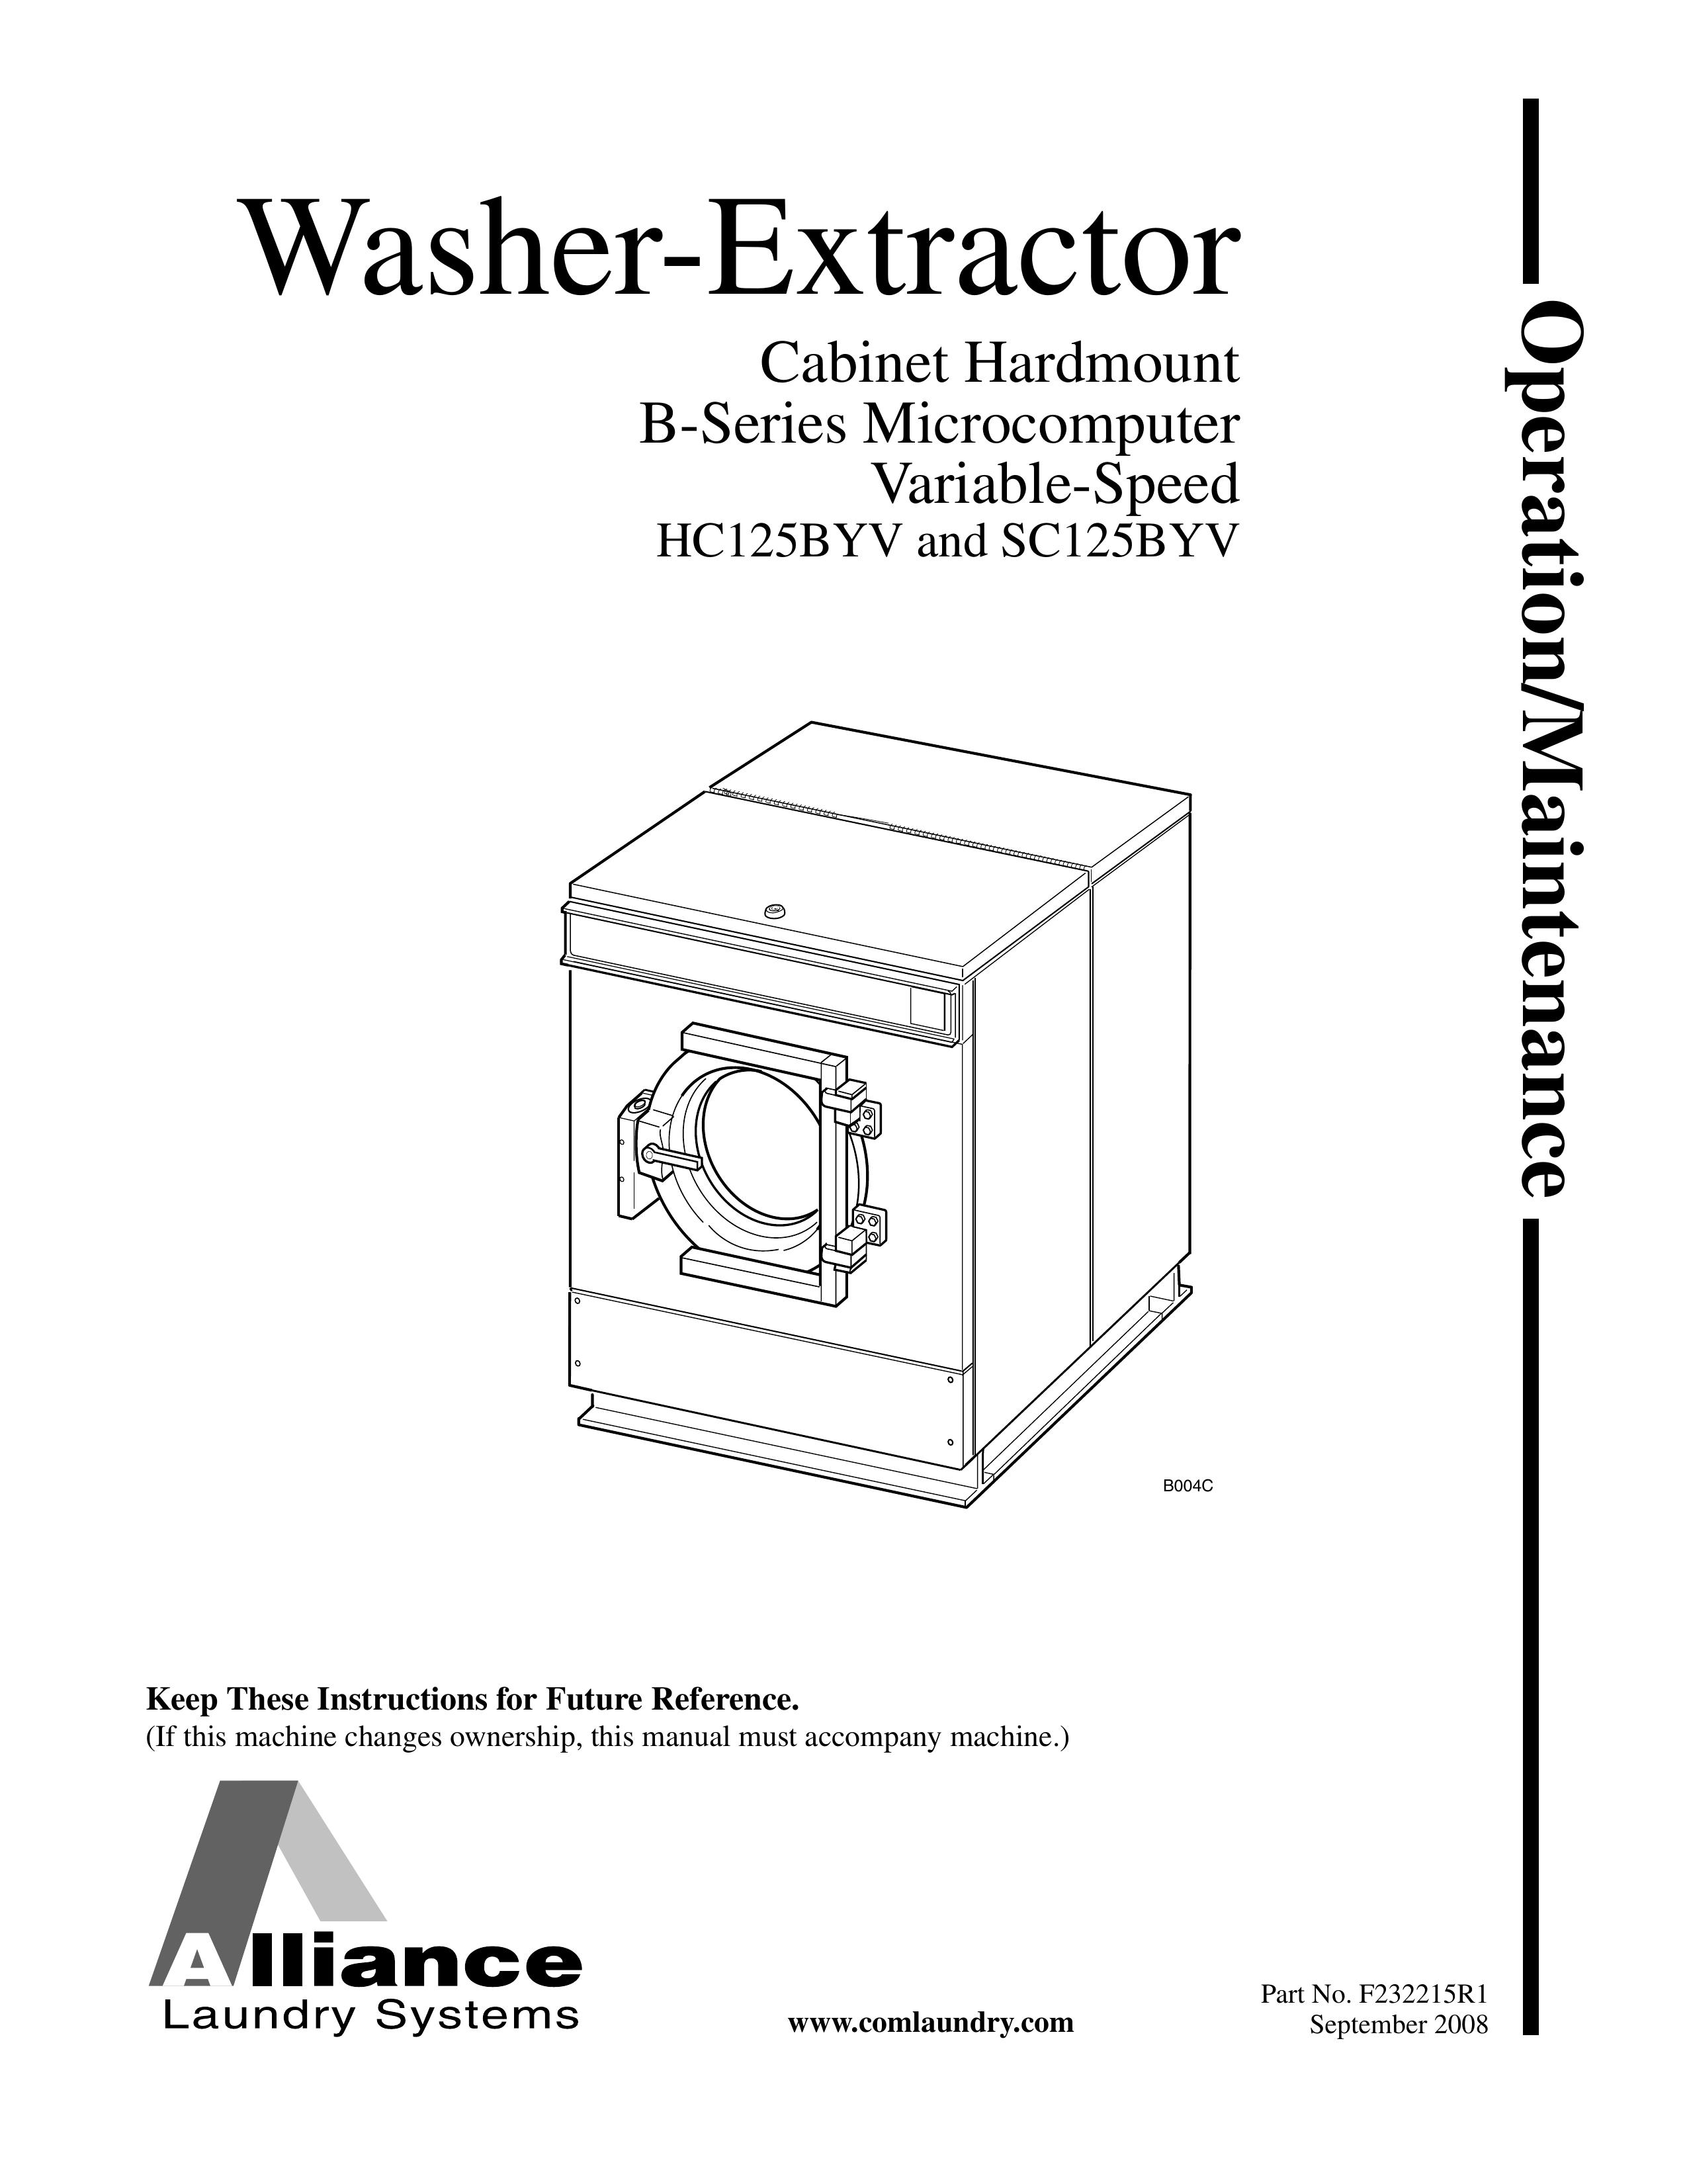 Alliance Laundry Systems SC125BYV Washer/Dryer User Manual (Page 1)